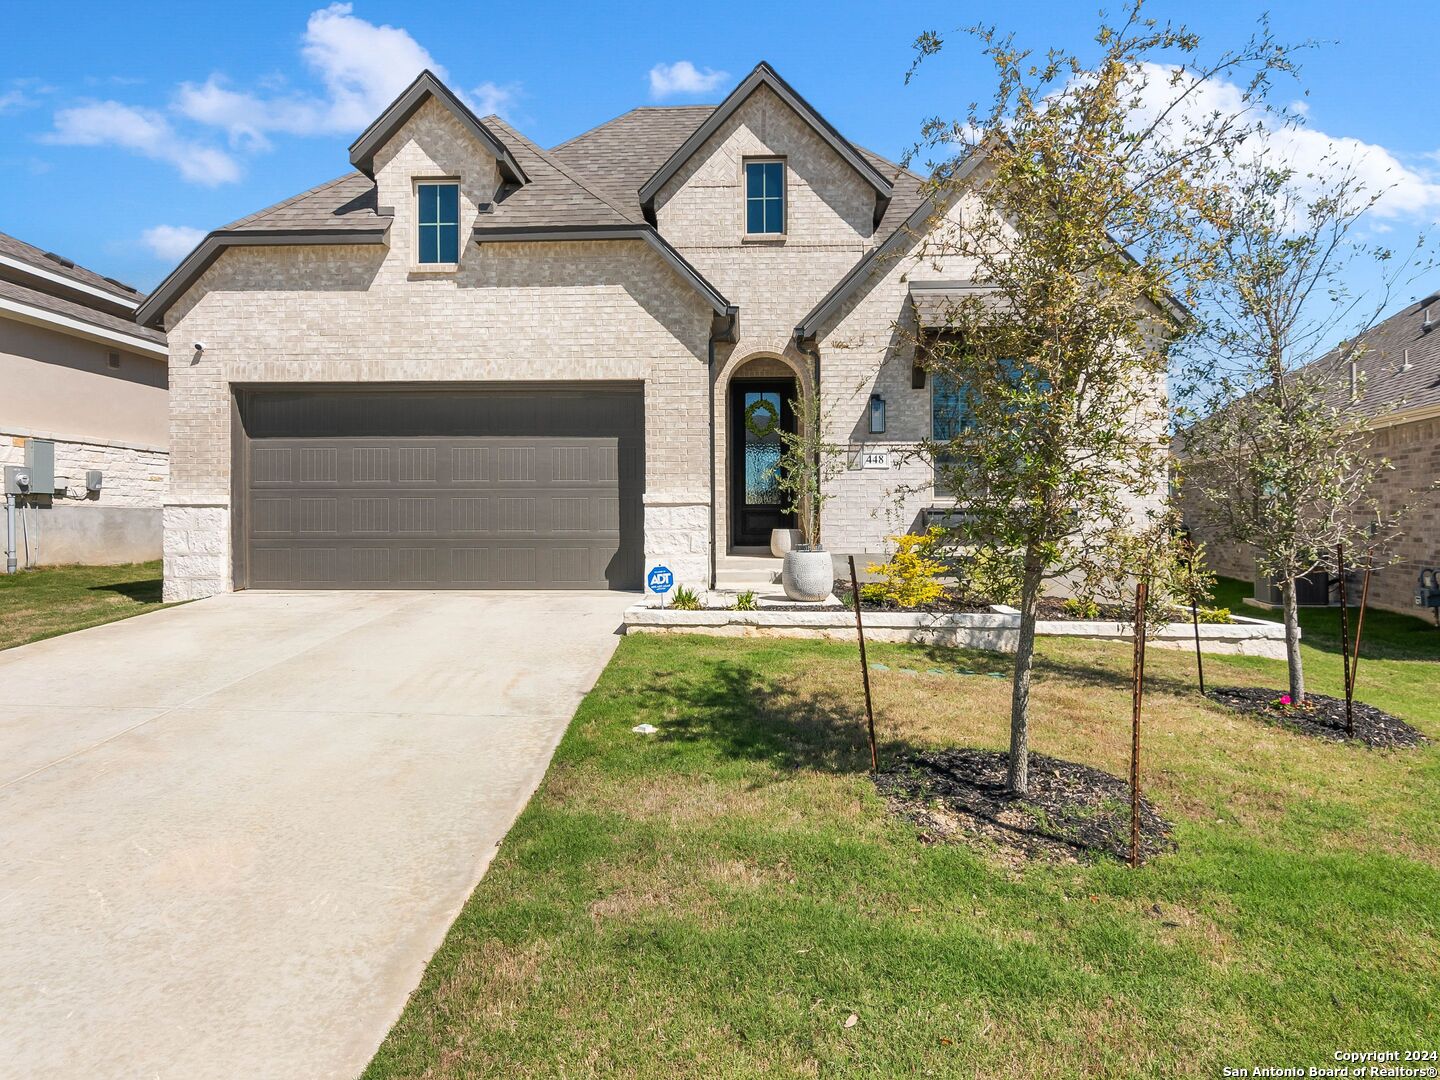 Photo of 448 Huntwick Dr in Boerne, TX